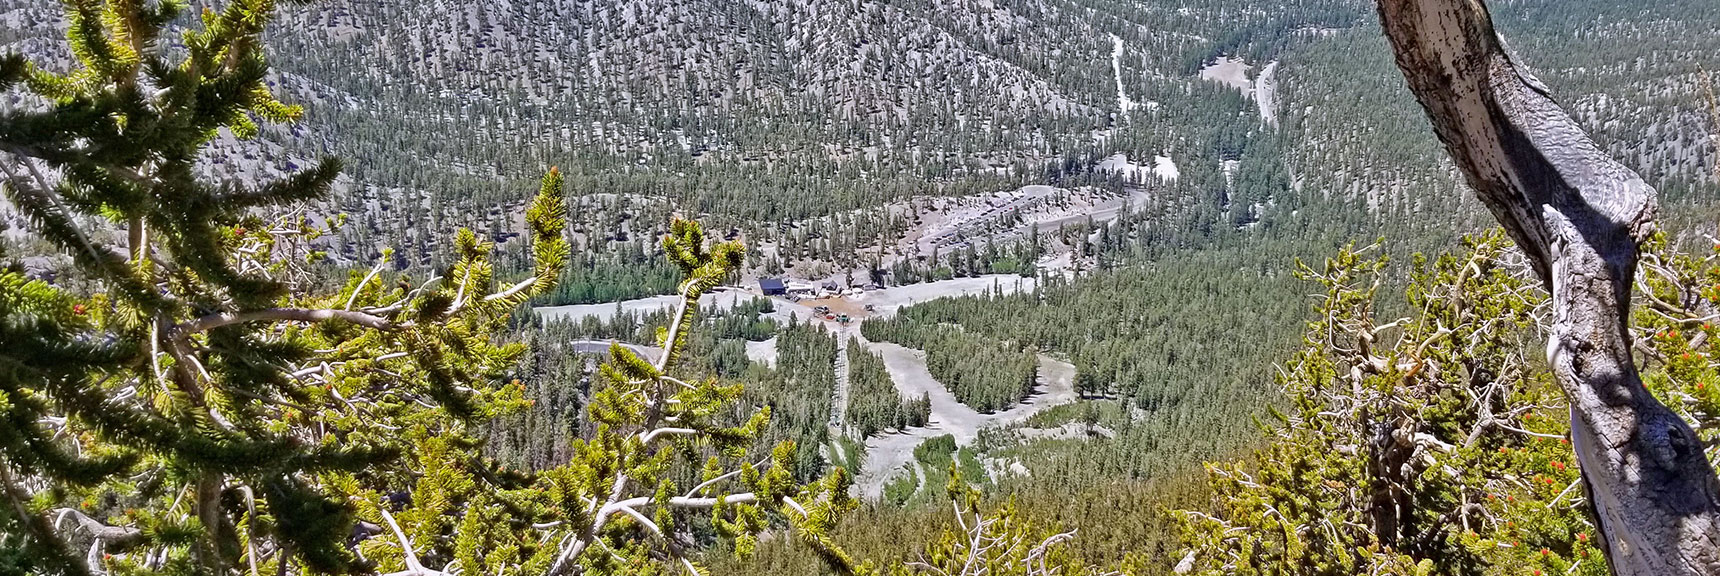 View Down to Lee Canyon Ski Area and Bristlecone Pine Trailhead and Meadow Almost Directly Below. | Lee to Kyle Canyon | Gradual Mid Ridge Approach | Mt. Charleston Wilderness | Spring Mountains, Nevada